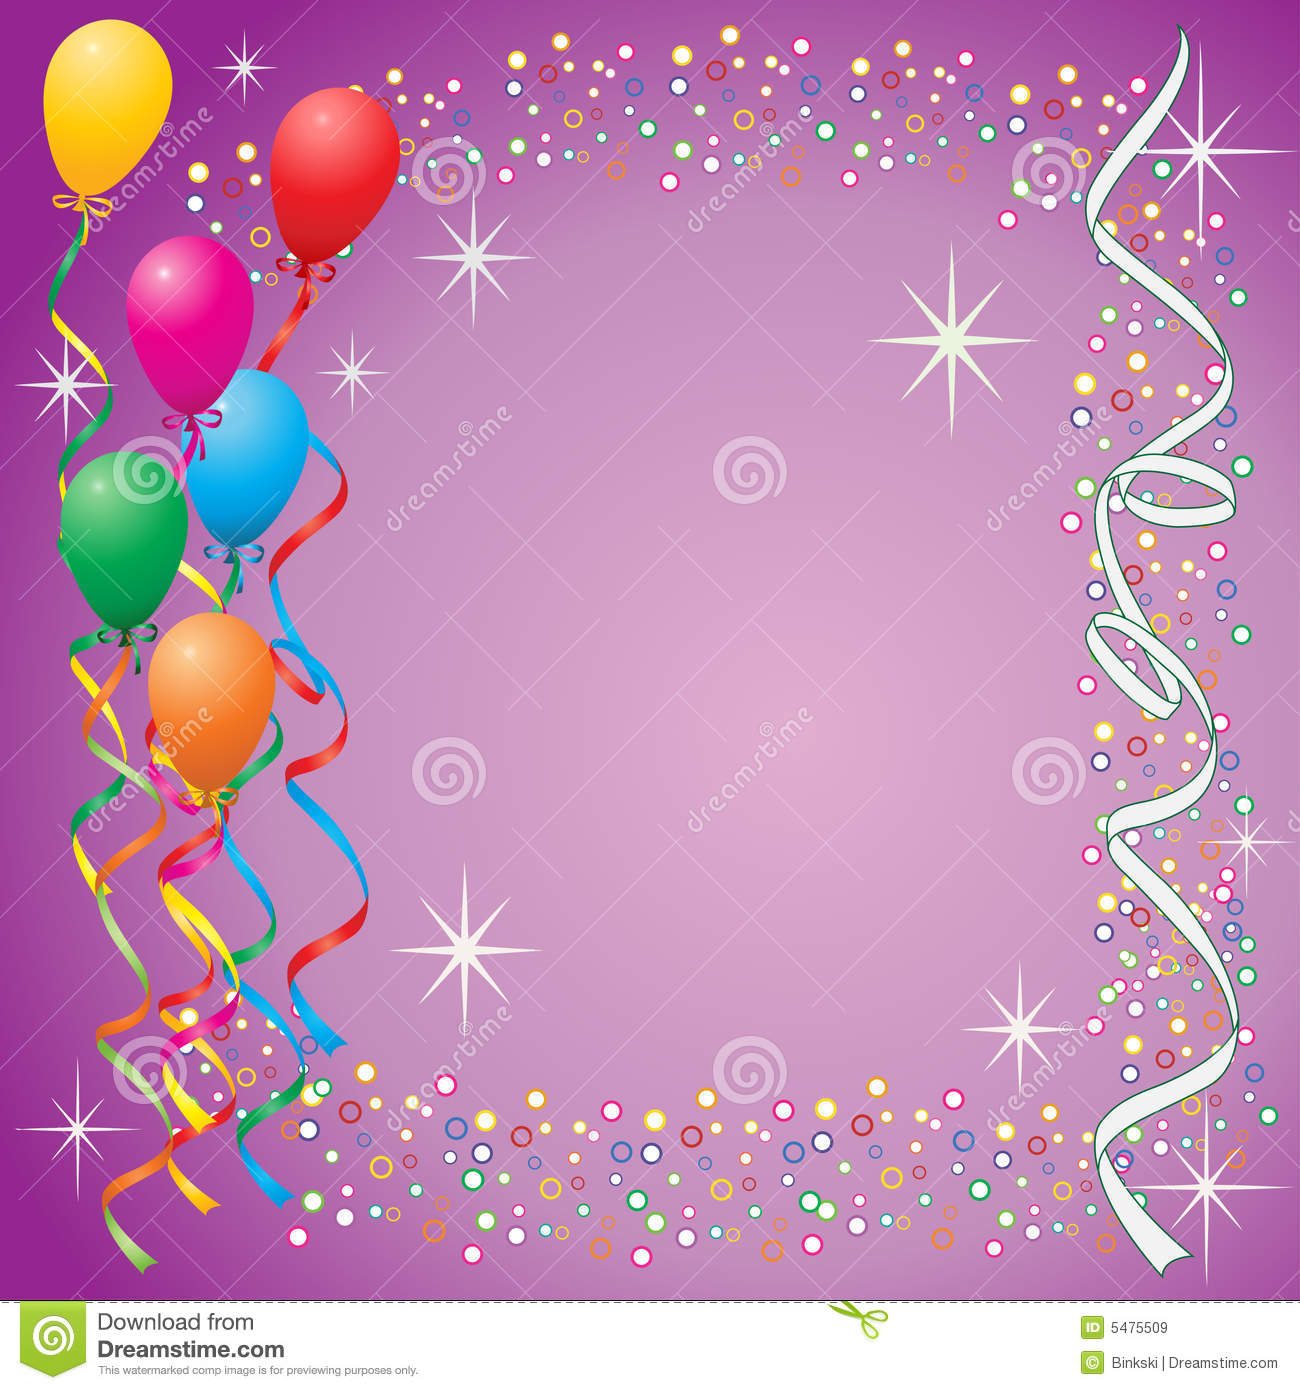 Balloon Background Royalty Free Stock Images   Image  5475509